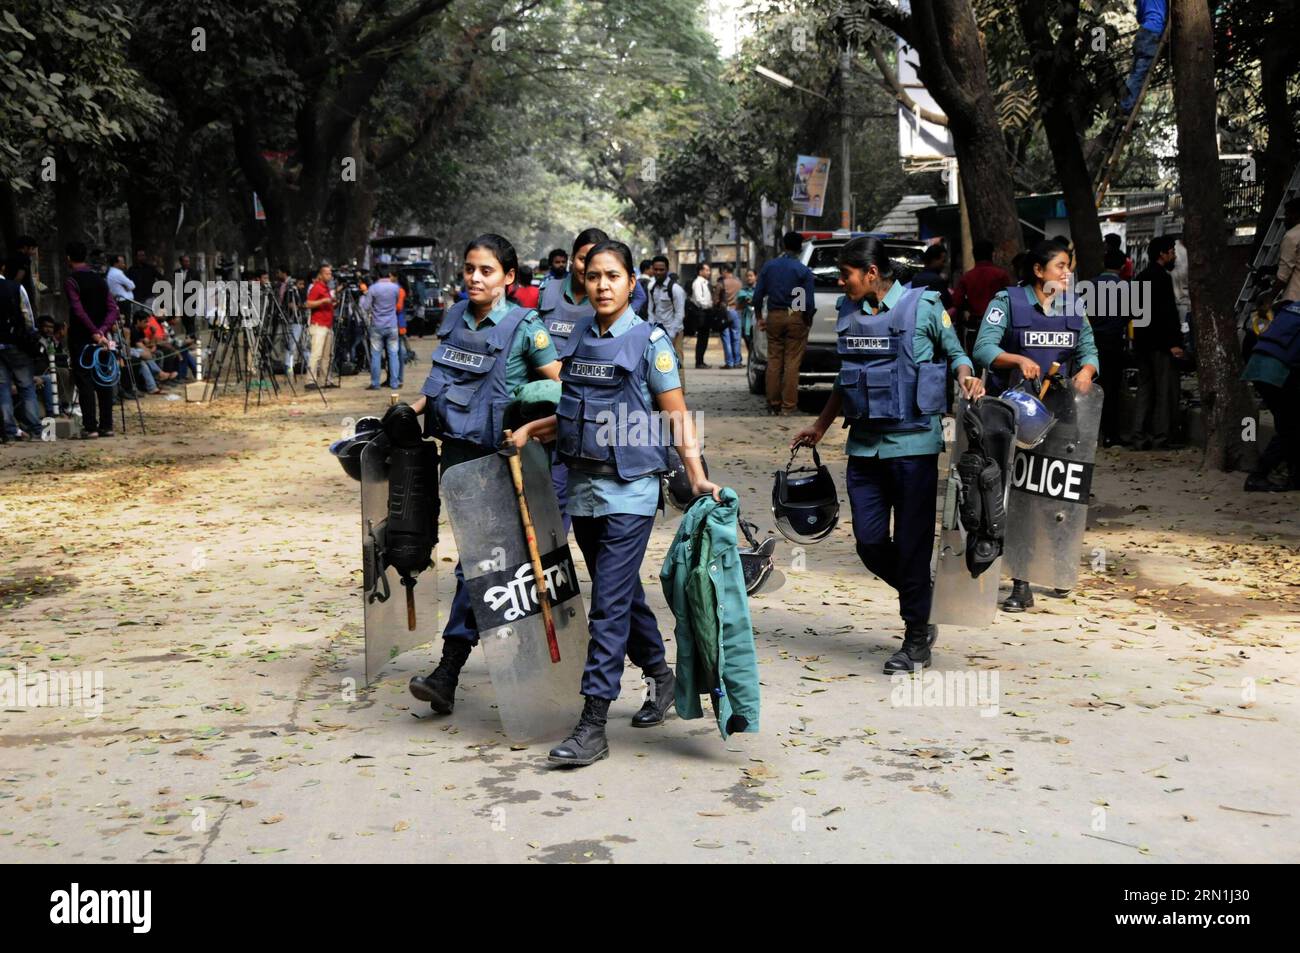 (150104) -- DHAKA, Jan. 4, 2015 -- Bangladeshi policewomen stand guard near the residence of former Prime Minister Khaleda Zia in Dhaka, Bangladesh, Jan. 4, 2015. Bangladesh s former prime minister Khaleda Zia, also chairperson of BNP, has remained cordoned off inside her office in capital Dhaka s Gushan diplomatic enclave since Saturday night. Police have also locked down the BNP s headquarters after searching it. )(zhf) BANGLADESH-DHAKA-EX-PM-OFFICE-CORDON OFF SharifulxIslam PUBLICATIONxNOTxINxCHN   Dhaka Jan 4 2015 Bangladeshi police women stand Guard Near The Residence of Former Prime Mini Stock Photo